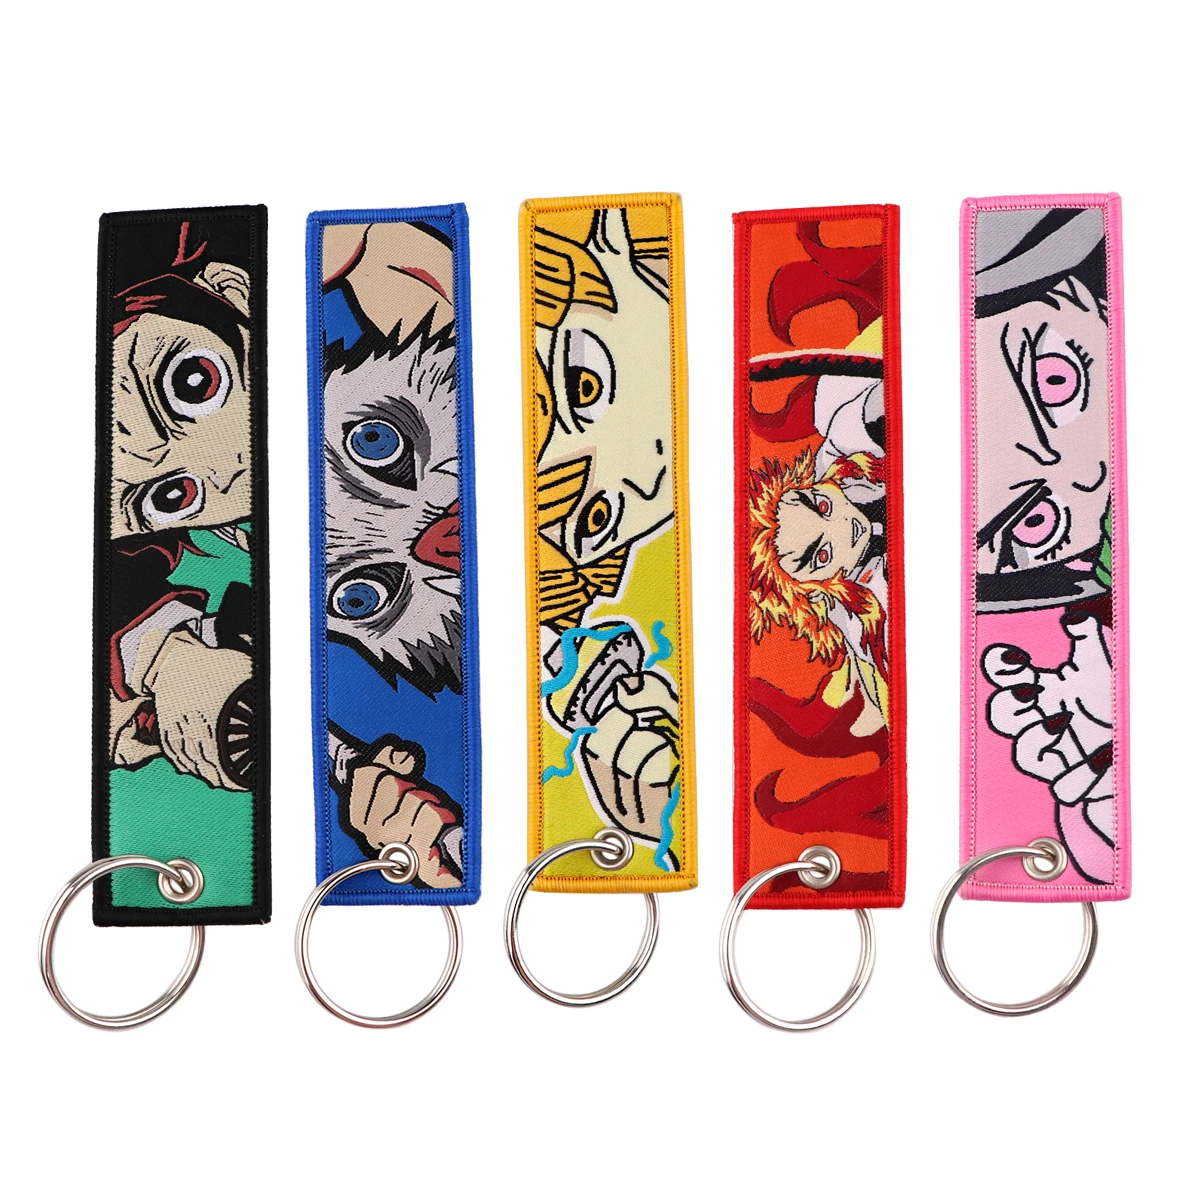 Japanese Anime Demon Slayer Key Tag New Embroidery Key Fobs for Motorcycles Cars Bag Backpack Novelty 1 - Demon Slayer Plush